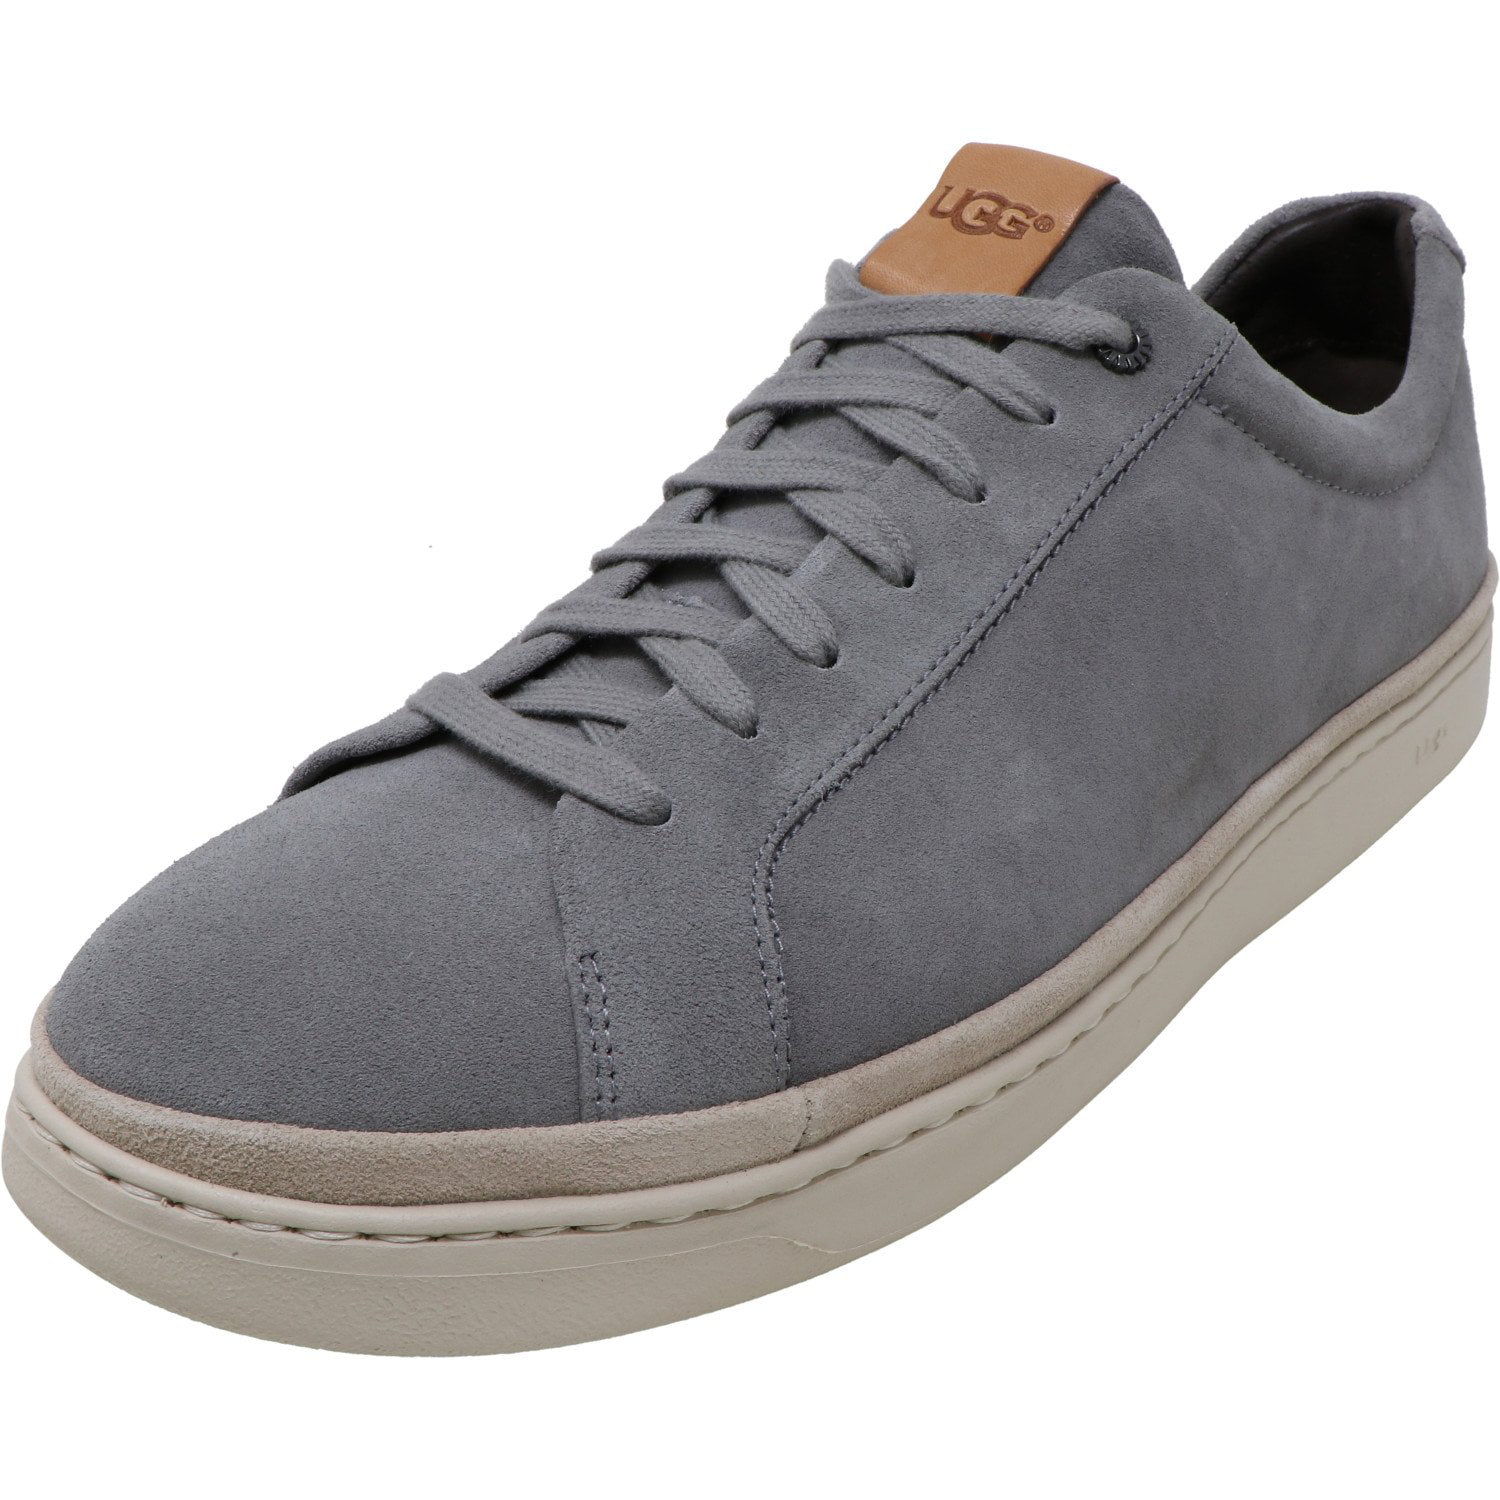 ugg men's cali lace low leather sneaker